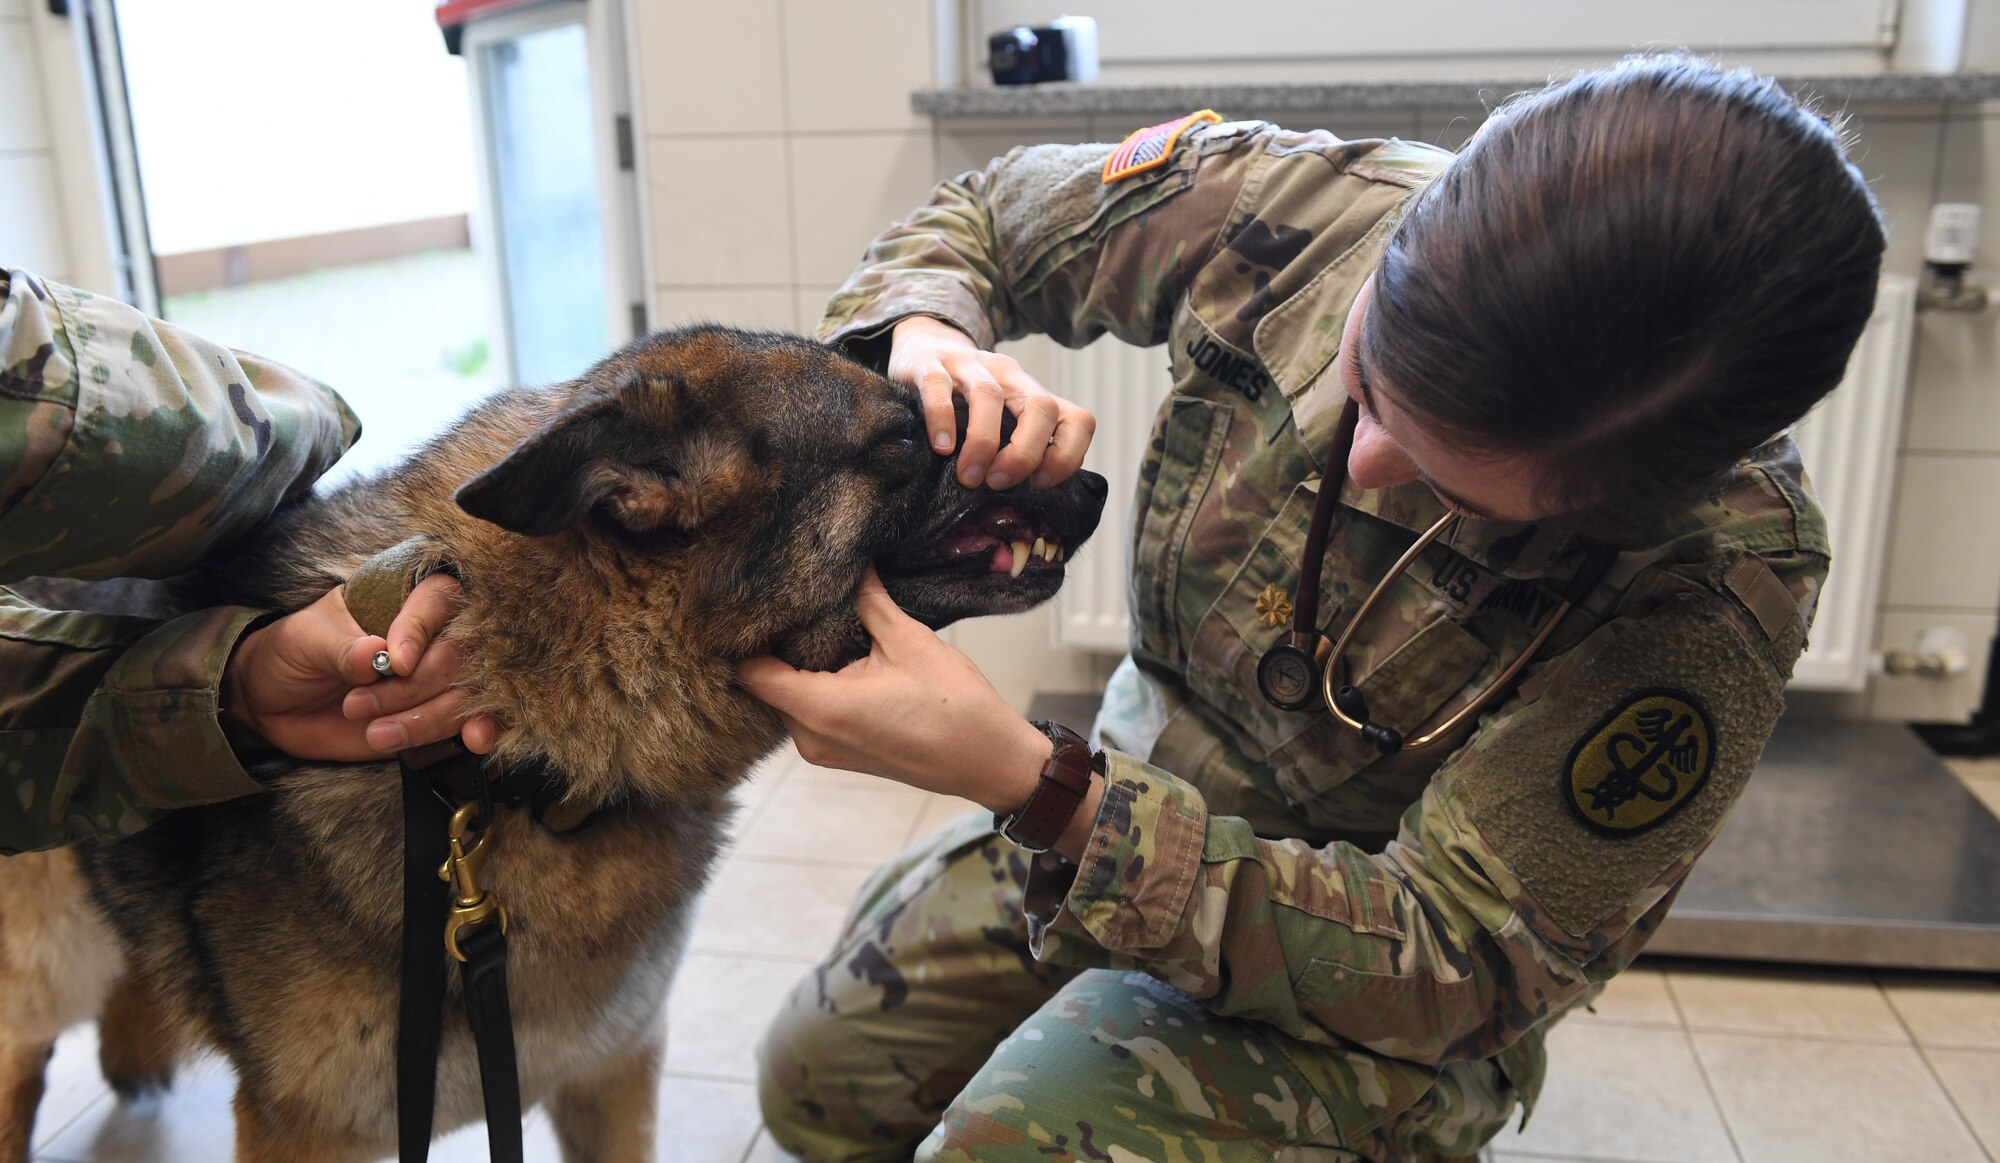 U.S. Army Maj. Monika Jones, 52nd Medical Group veterinarian inspects the teeth of Karla, 52nd Fighter Wing Security Forces Squadron military working dog, at Spangdahlem Air Base, Germany, Mar. 5, 2020. Dental health is as important for dogs as it is for humans, and plays a pivotal role in making sure MWDs are ready for duty. (U.S. Air Force photo by Airman 1st Class Alison Stewart)